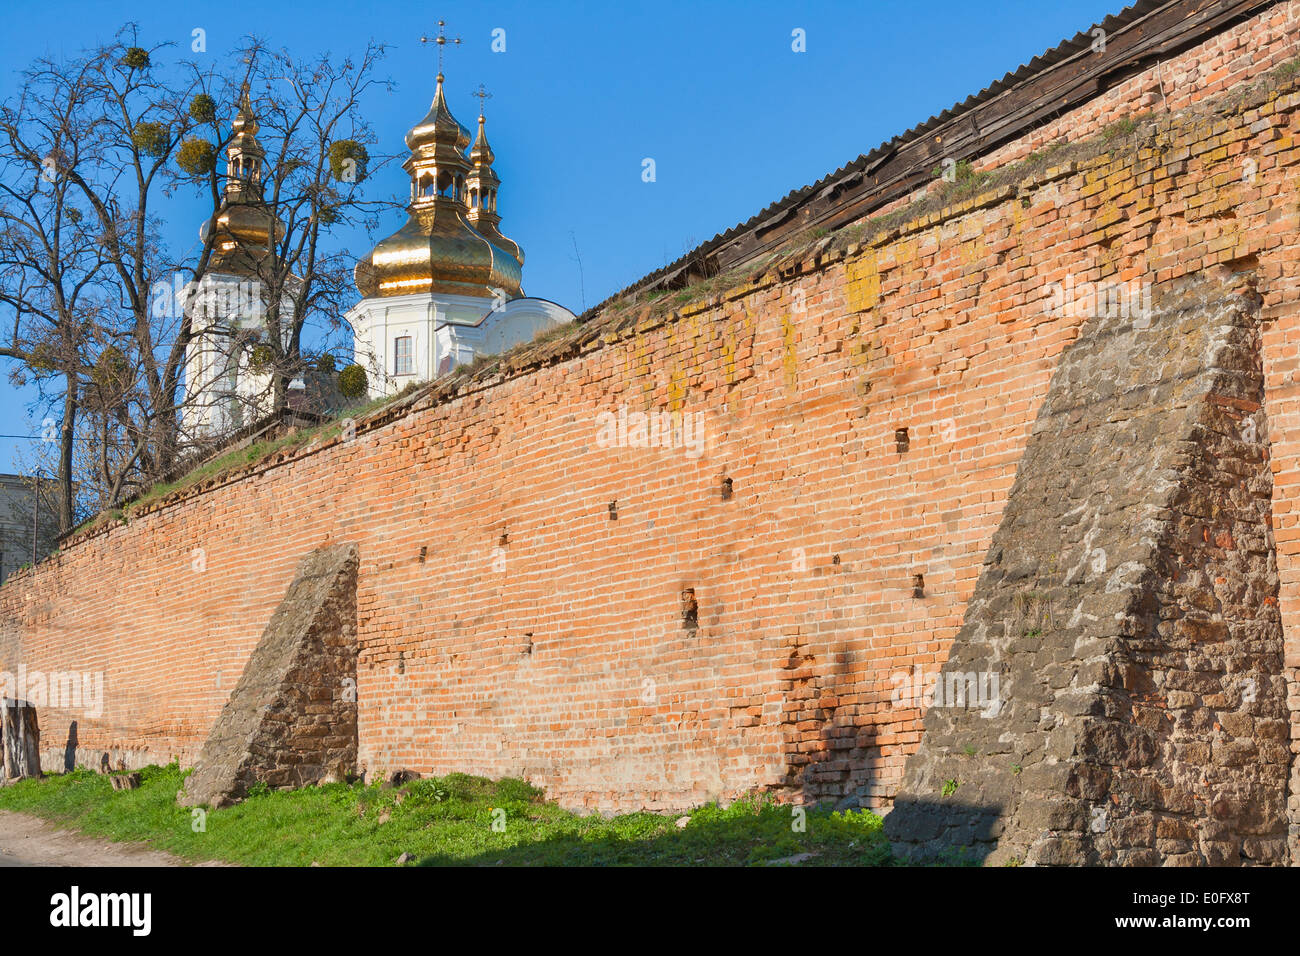 Vinnitsia historic city center with the complex of medieval fortification walls 'Muri' and Domes of Transfiguration Cathedral Stock Photo